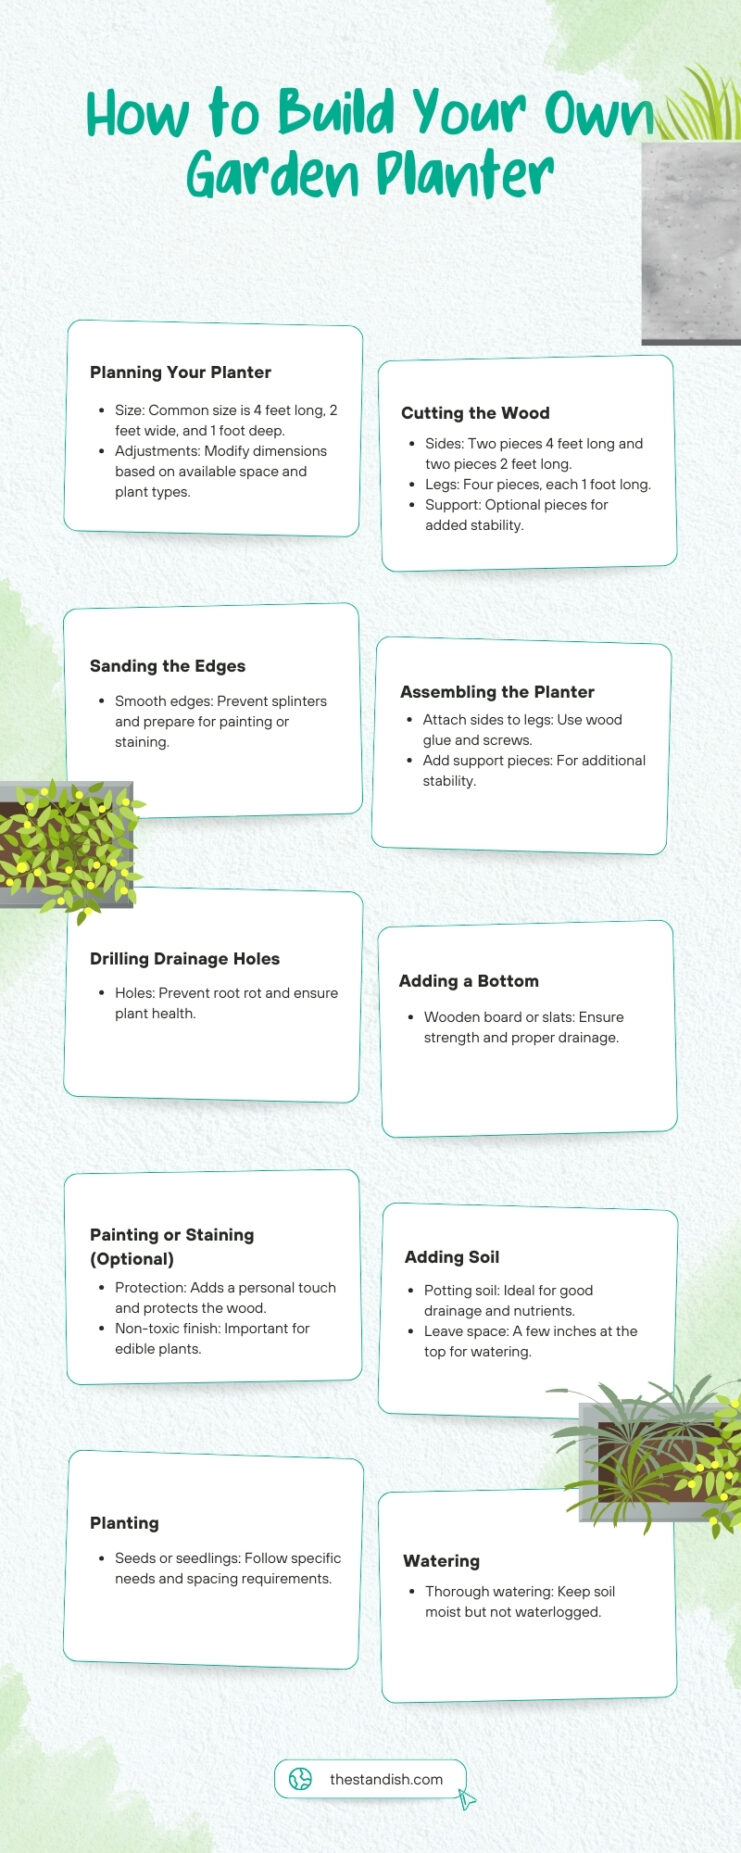 How to Build Your Own Garden Planter Infographic